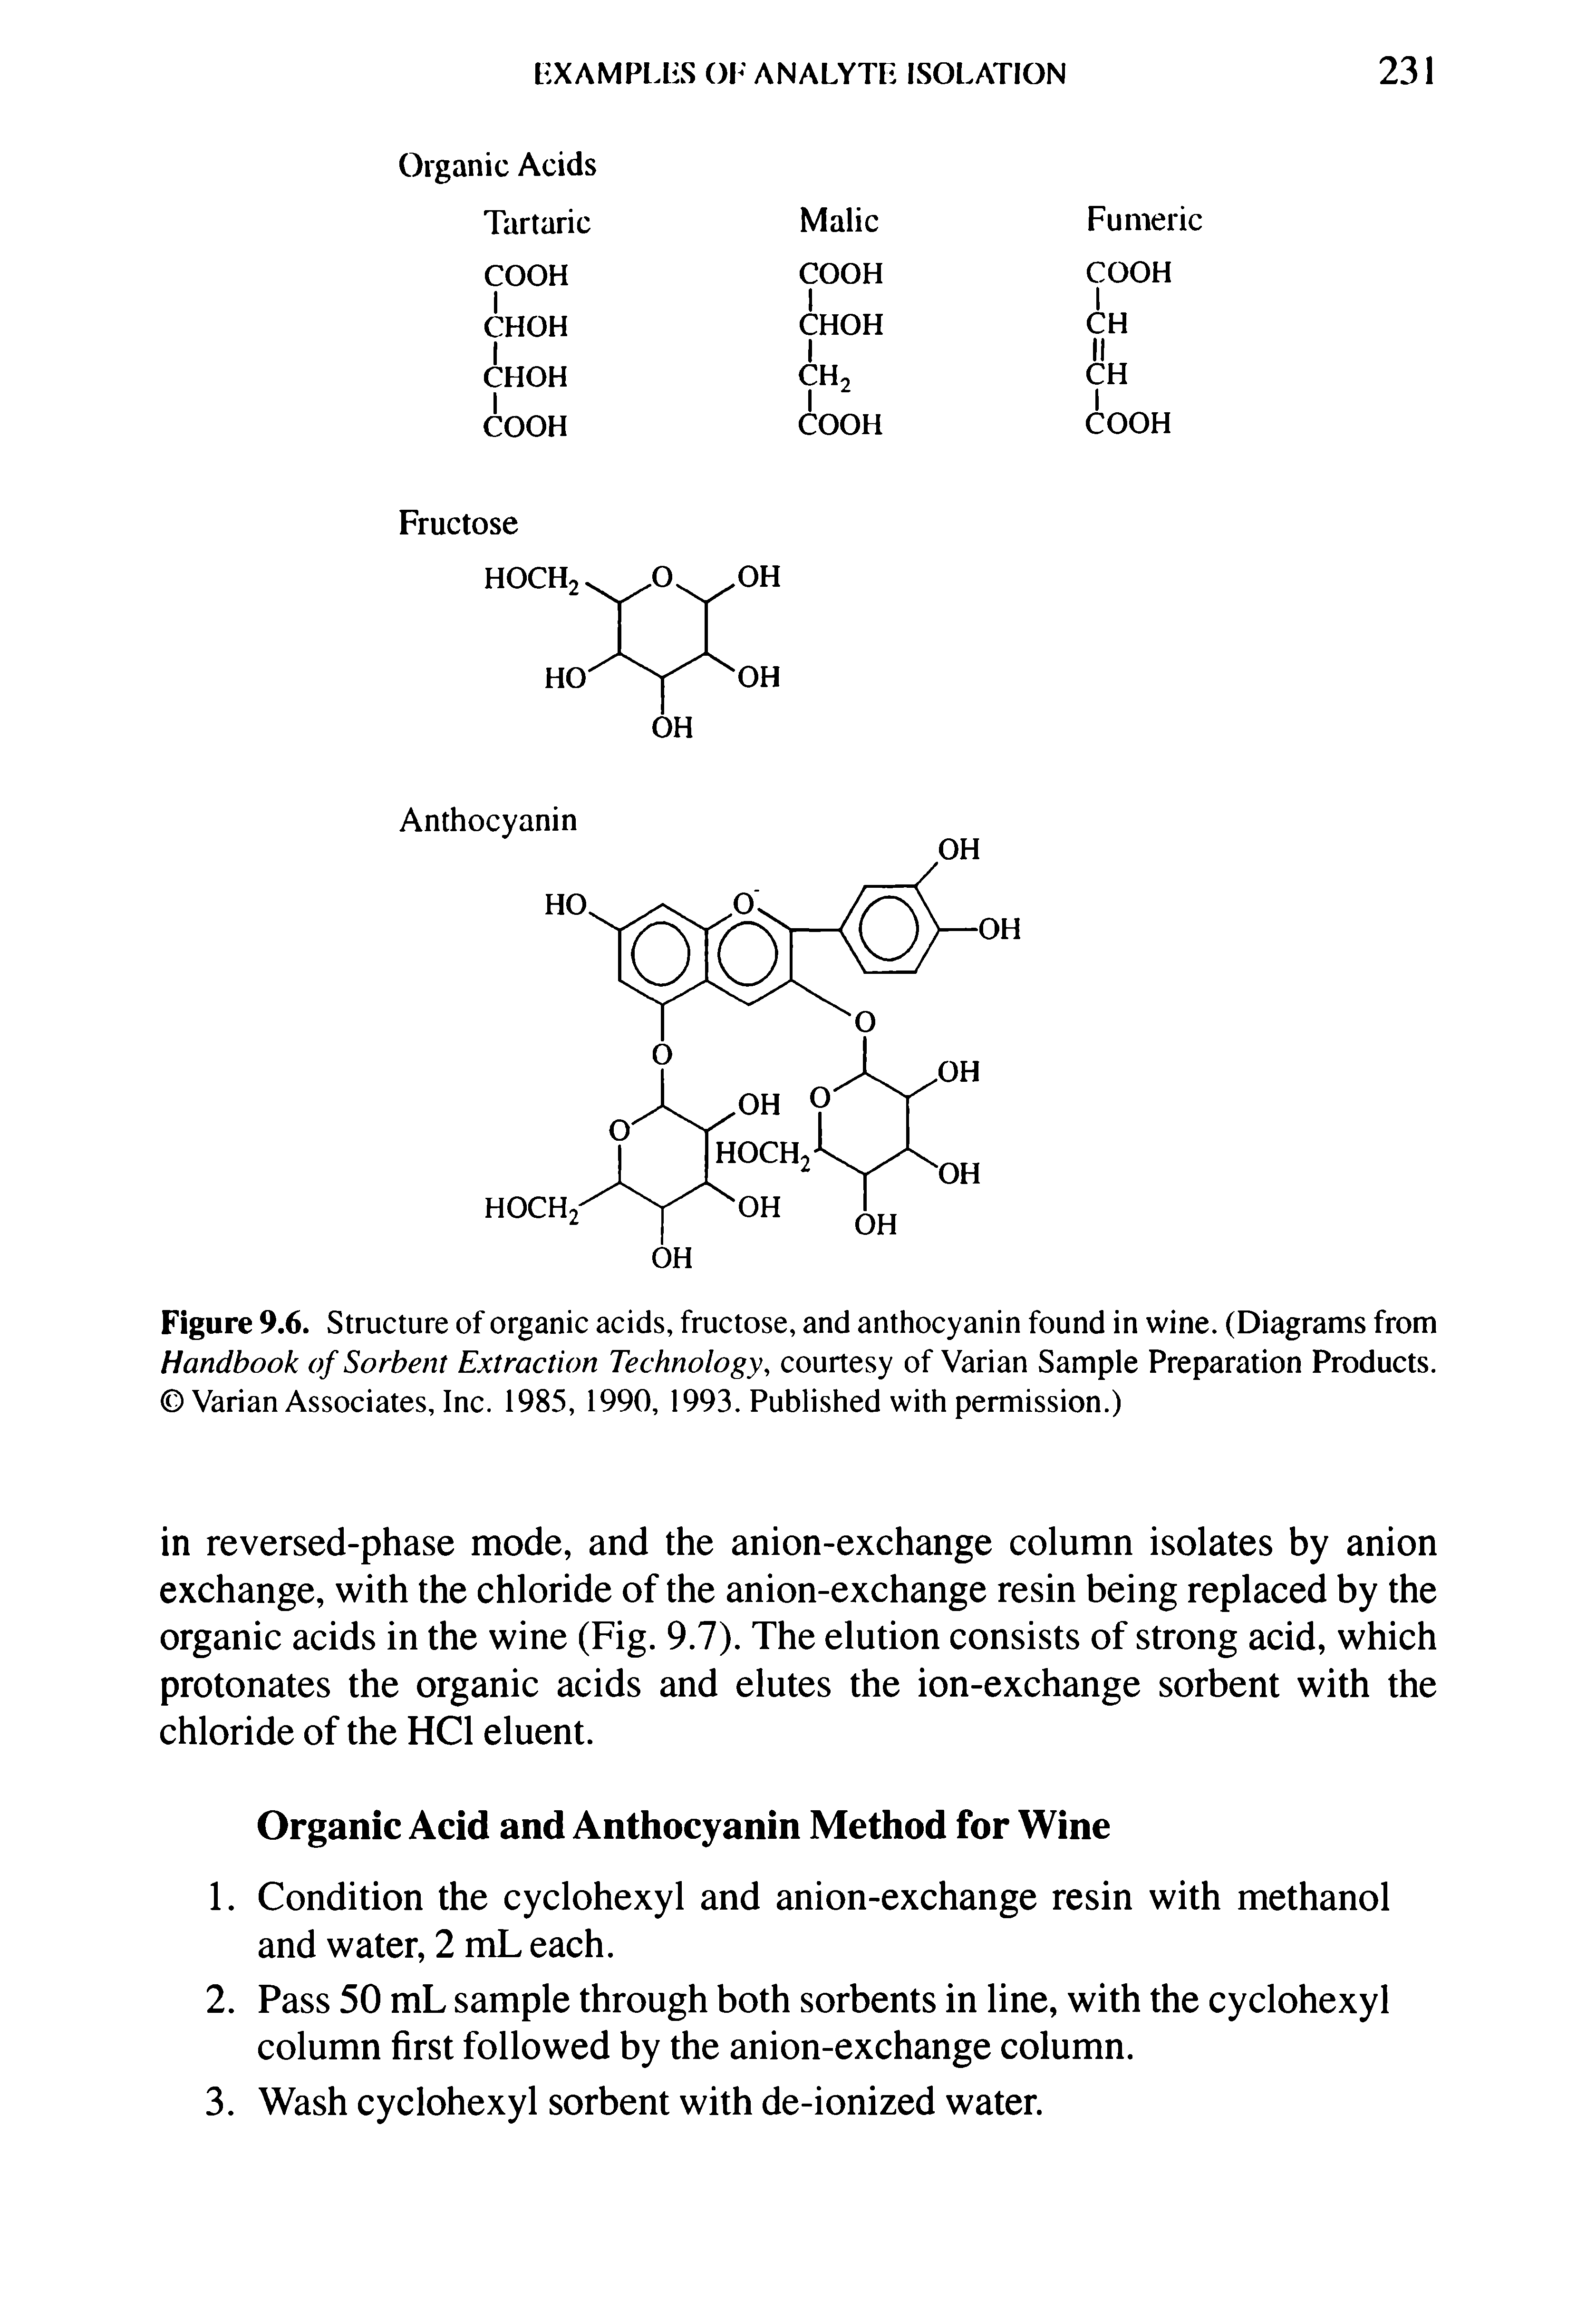 Figure 9.6. Structure of organic acids, fructose, and anthocyanin found in wine. (Diagrams from Handbook of Sorbent Extraction Technology, courtesy of Varian Sample Preparation Products. Varian Associates, Inc. 1985, 1990, 1993. Published with permission.)...